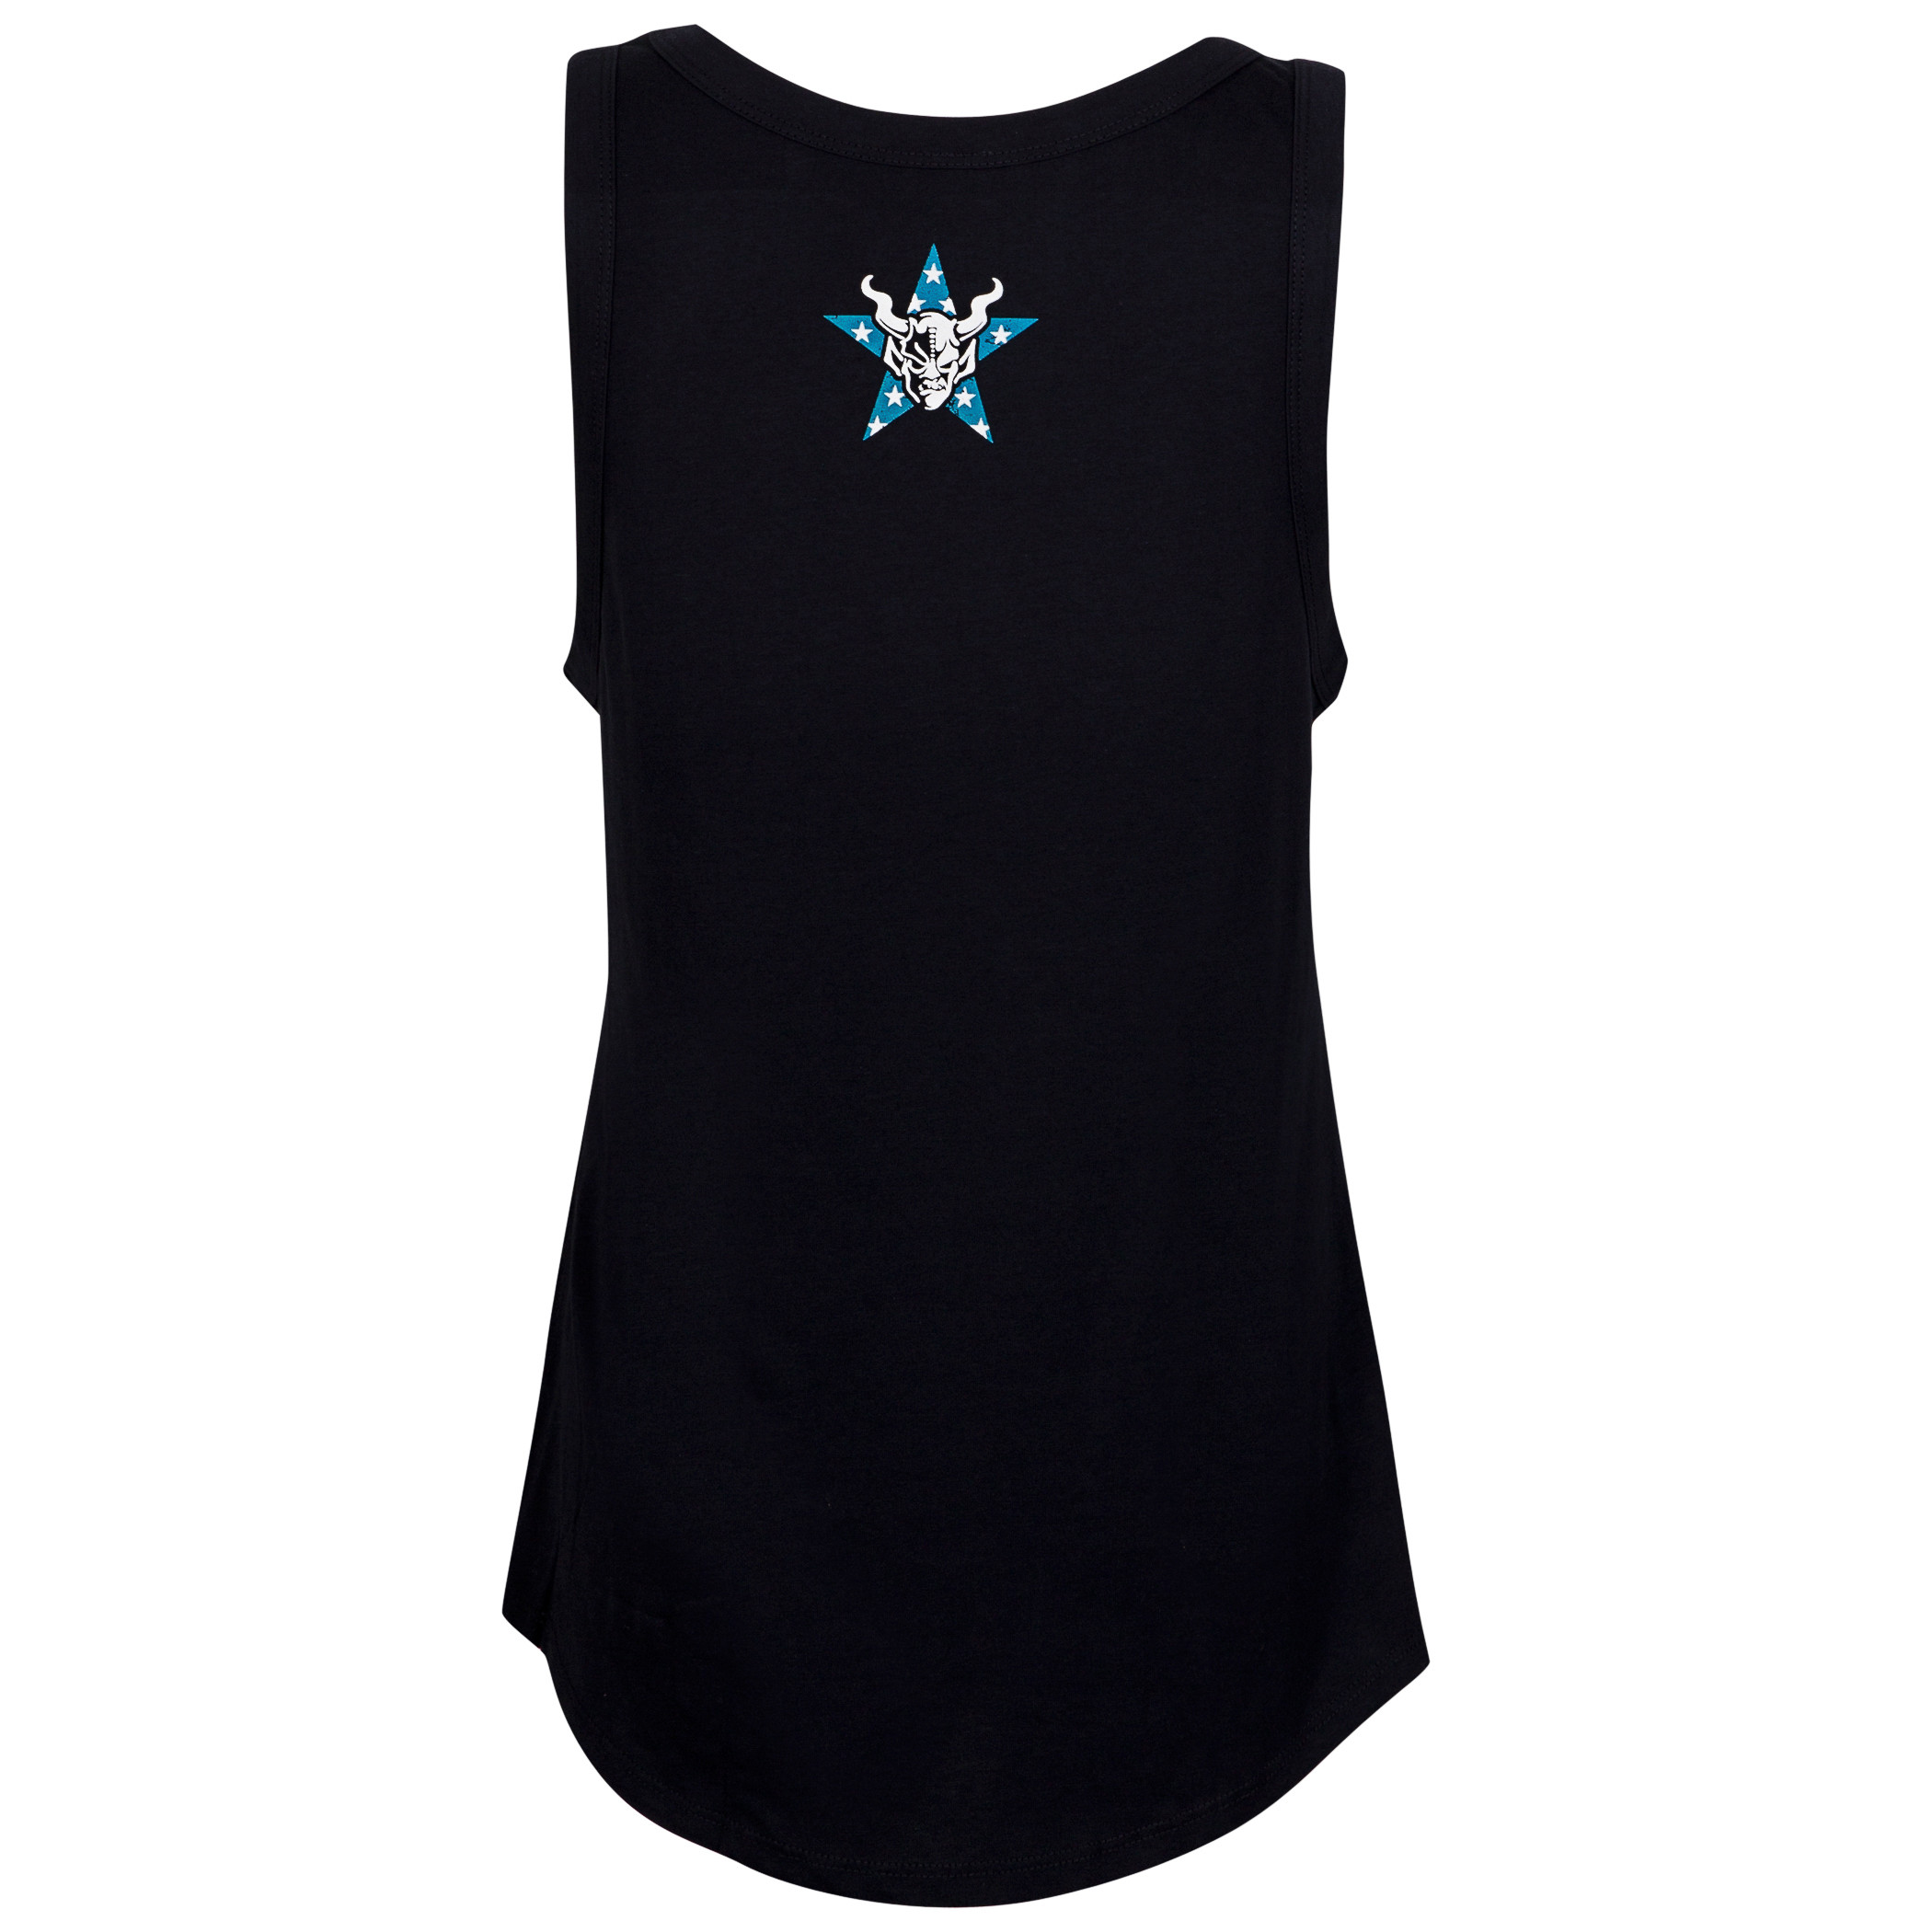 Stone Brewing Red White And Blue Women's Black Tank Top